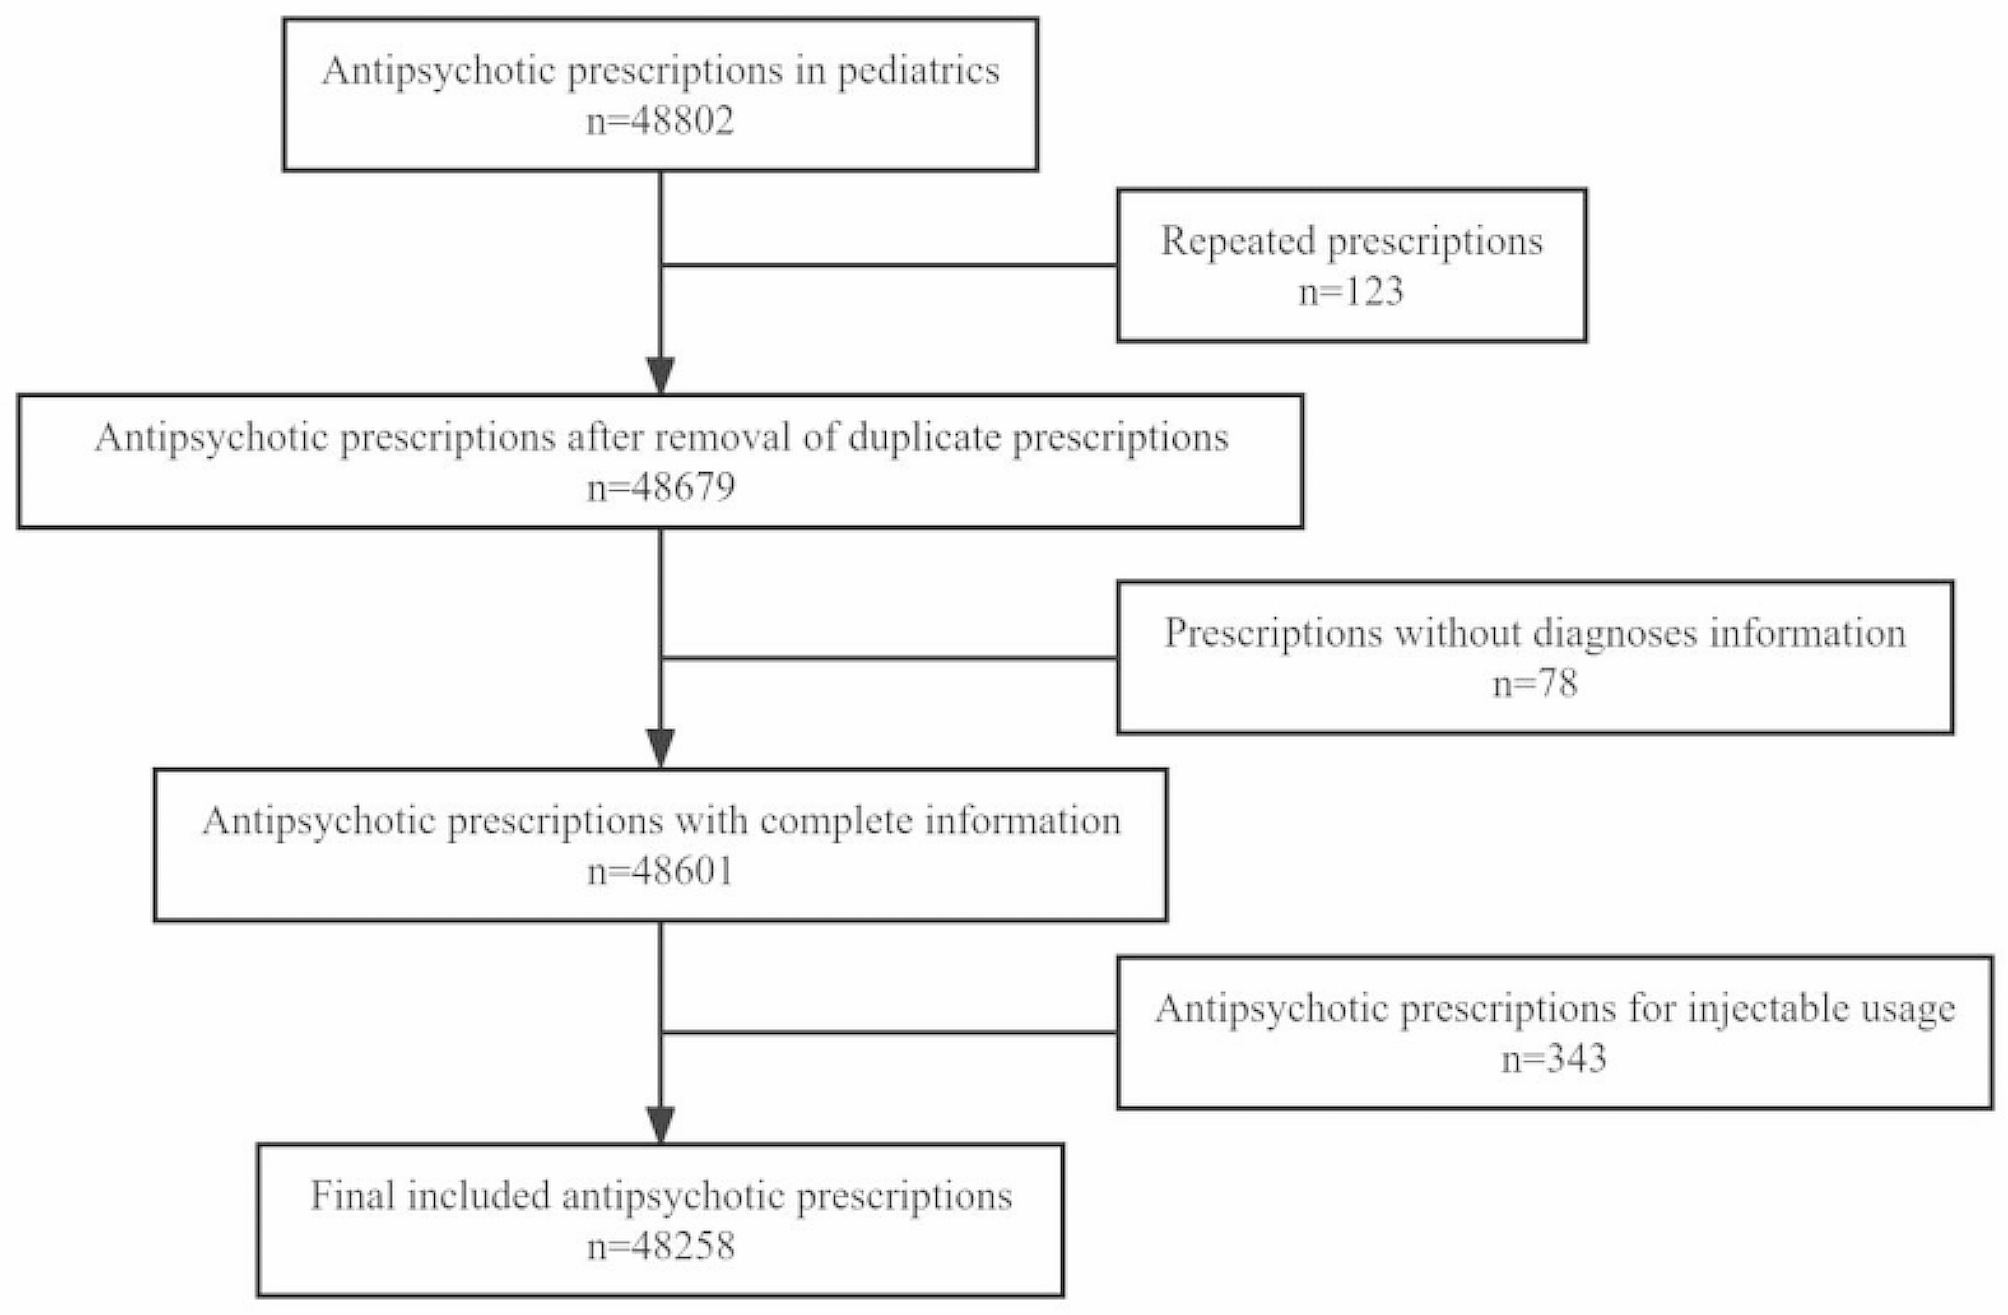 Trends and off-label utilization of antipsychotics in children and adolescents from 2016 to 2021 in China: a real-world study